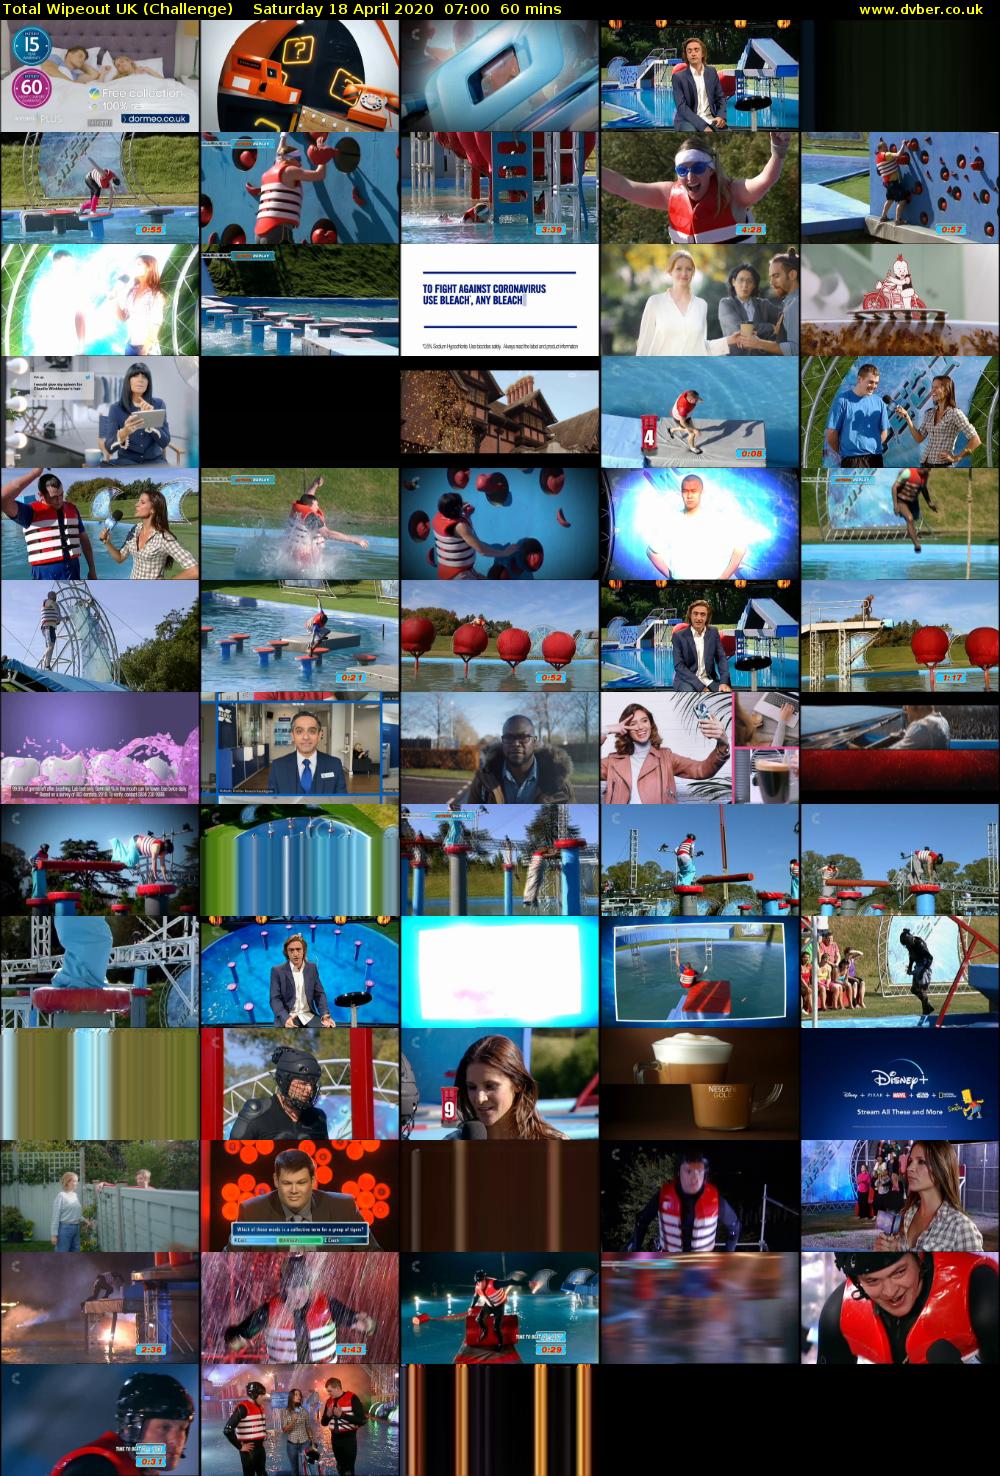 Total Wipeout UK (Challenge) Saturday 18 April 2020 07:00 - 08:00